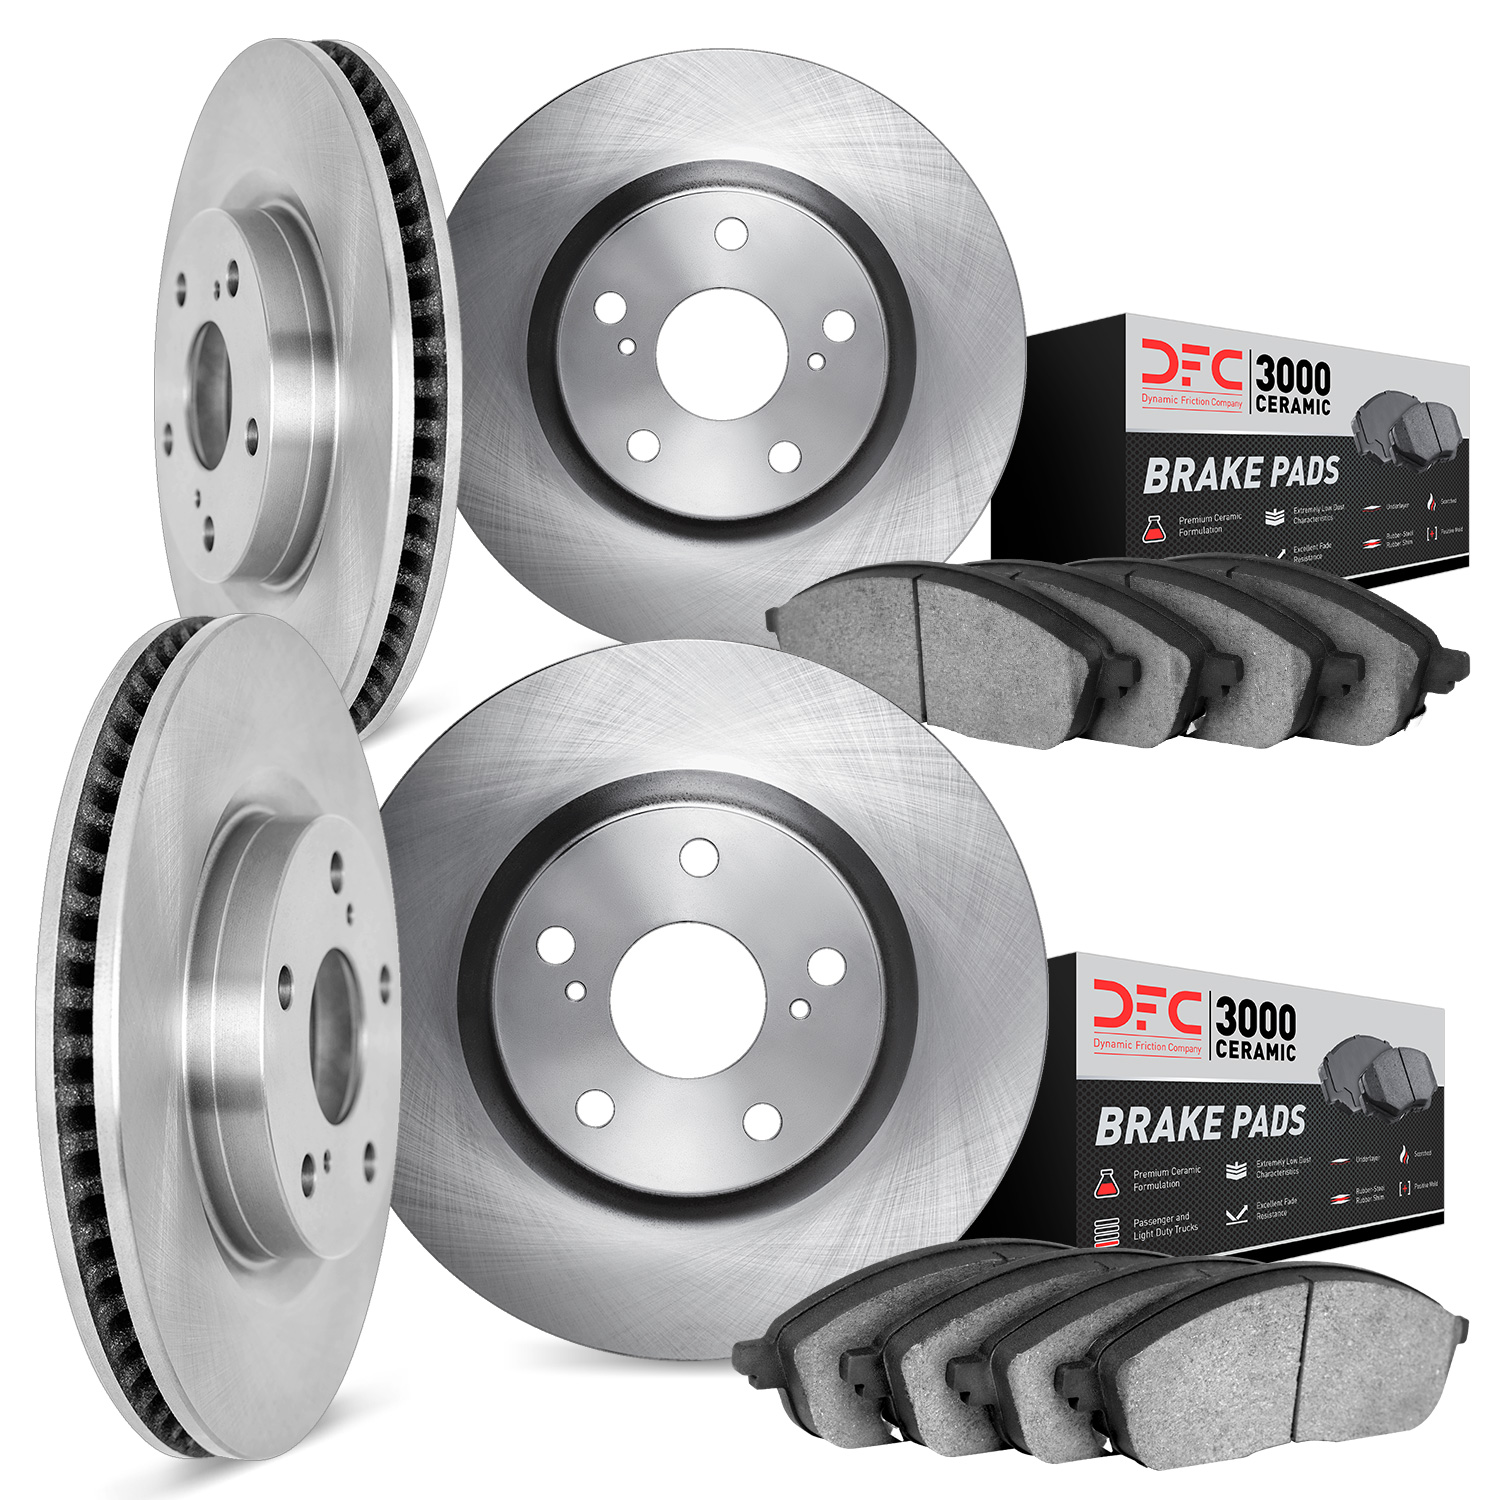 6304-75020 Brake Rotors with 3000-Series Ceramic Brake Pads Kit, 2013-2020 Lexus/Toyota/Scion, Position: Front and Rear